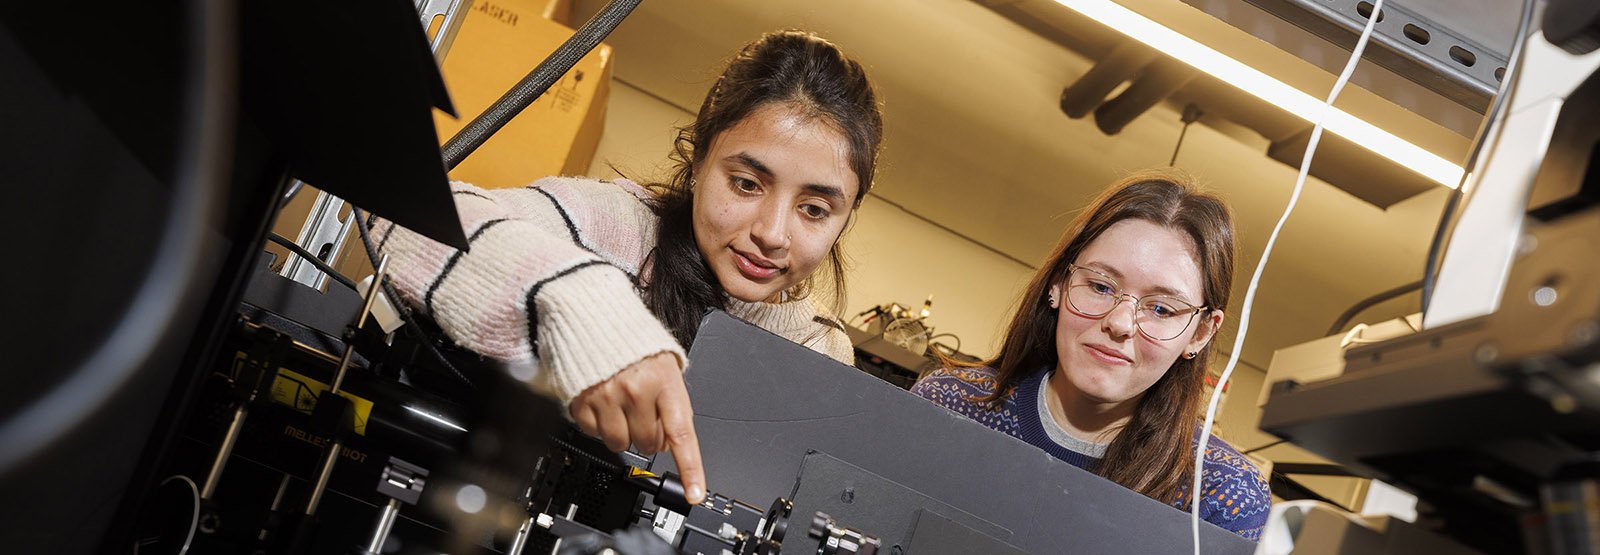 Two women students working in an engineering lab.